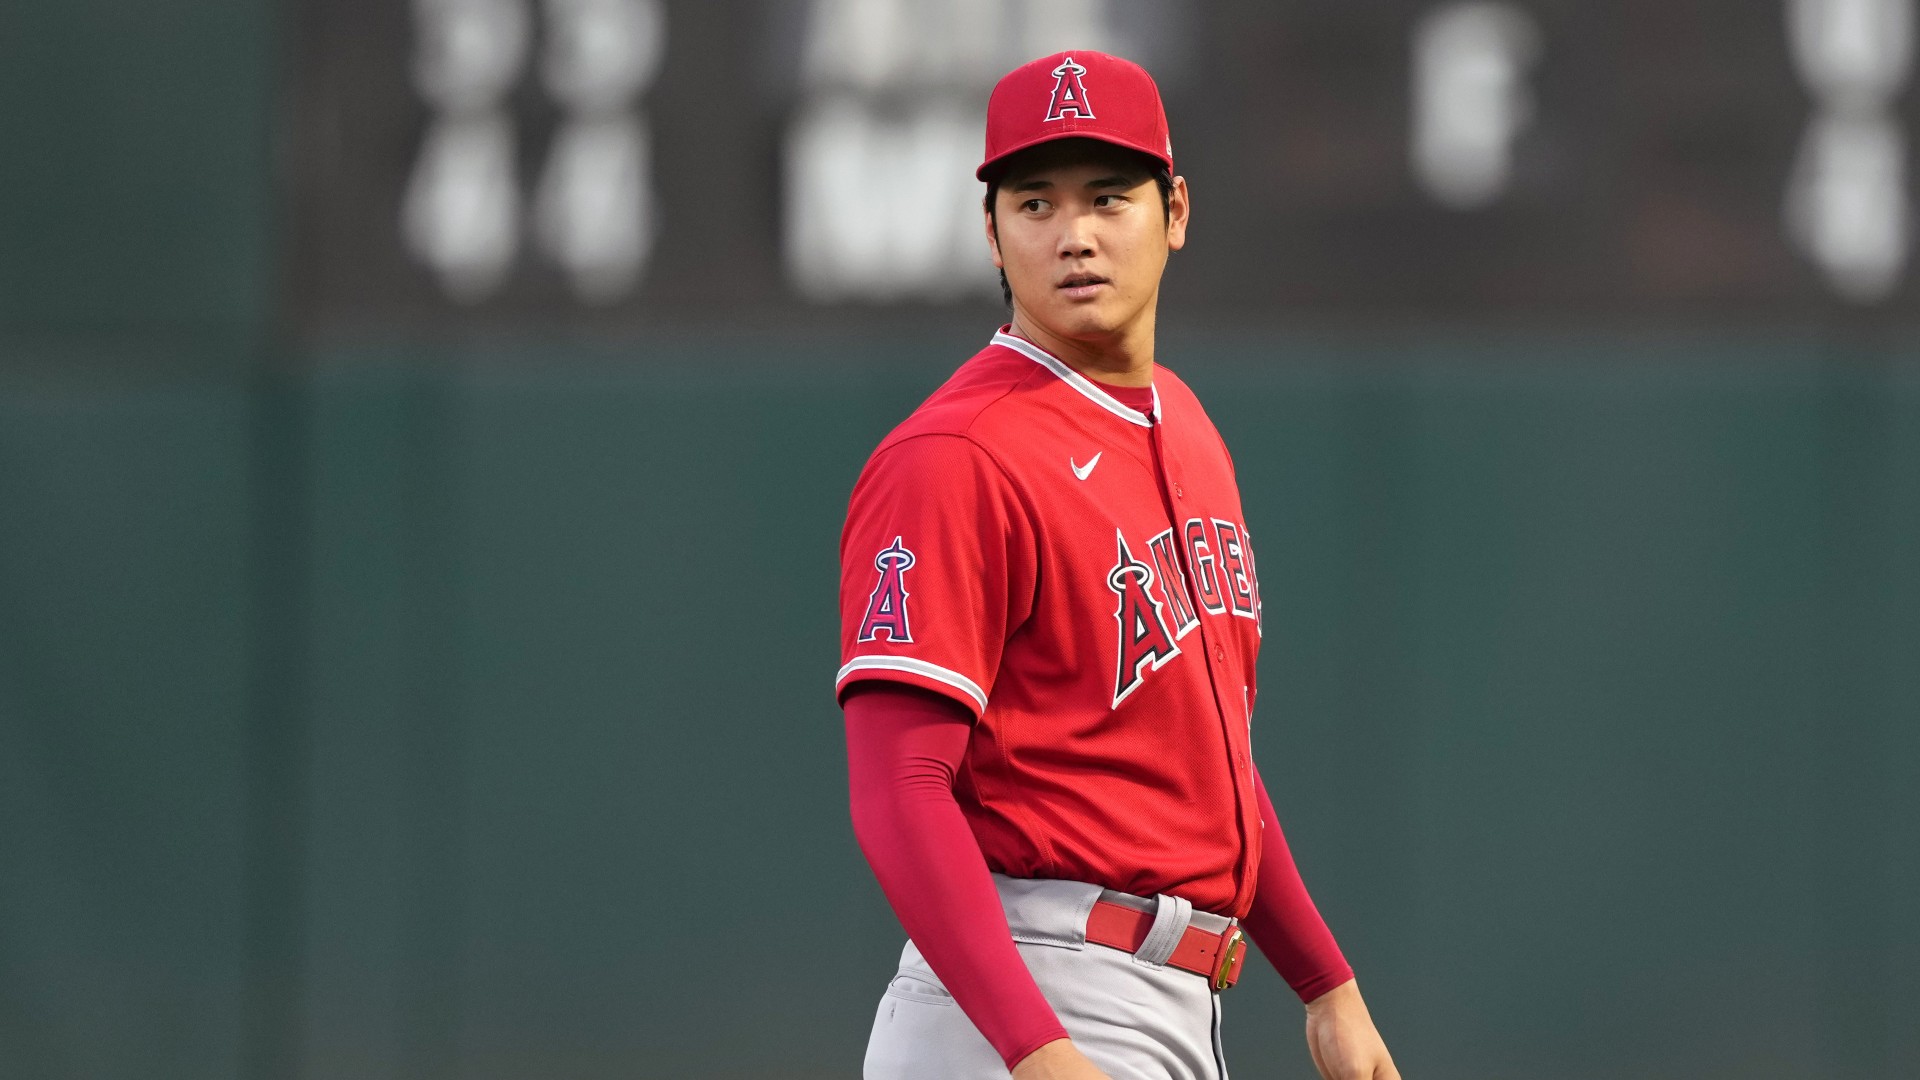 Why would Shohei Ohtani want to sign with the Padres? - The Athletic